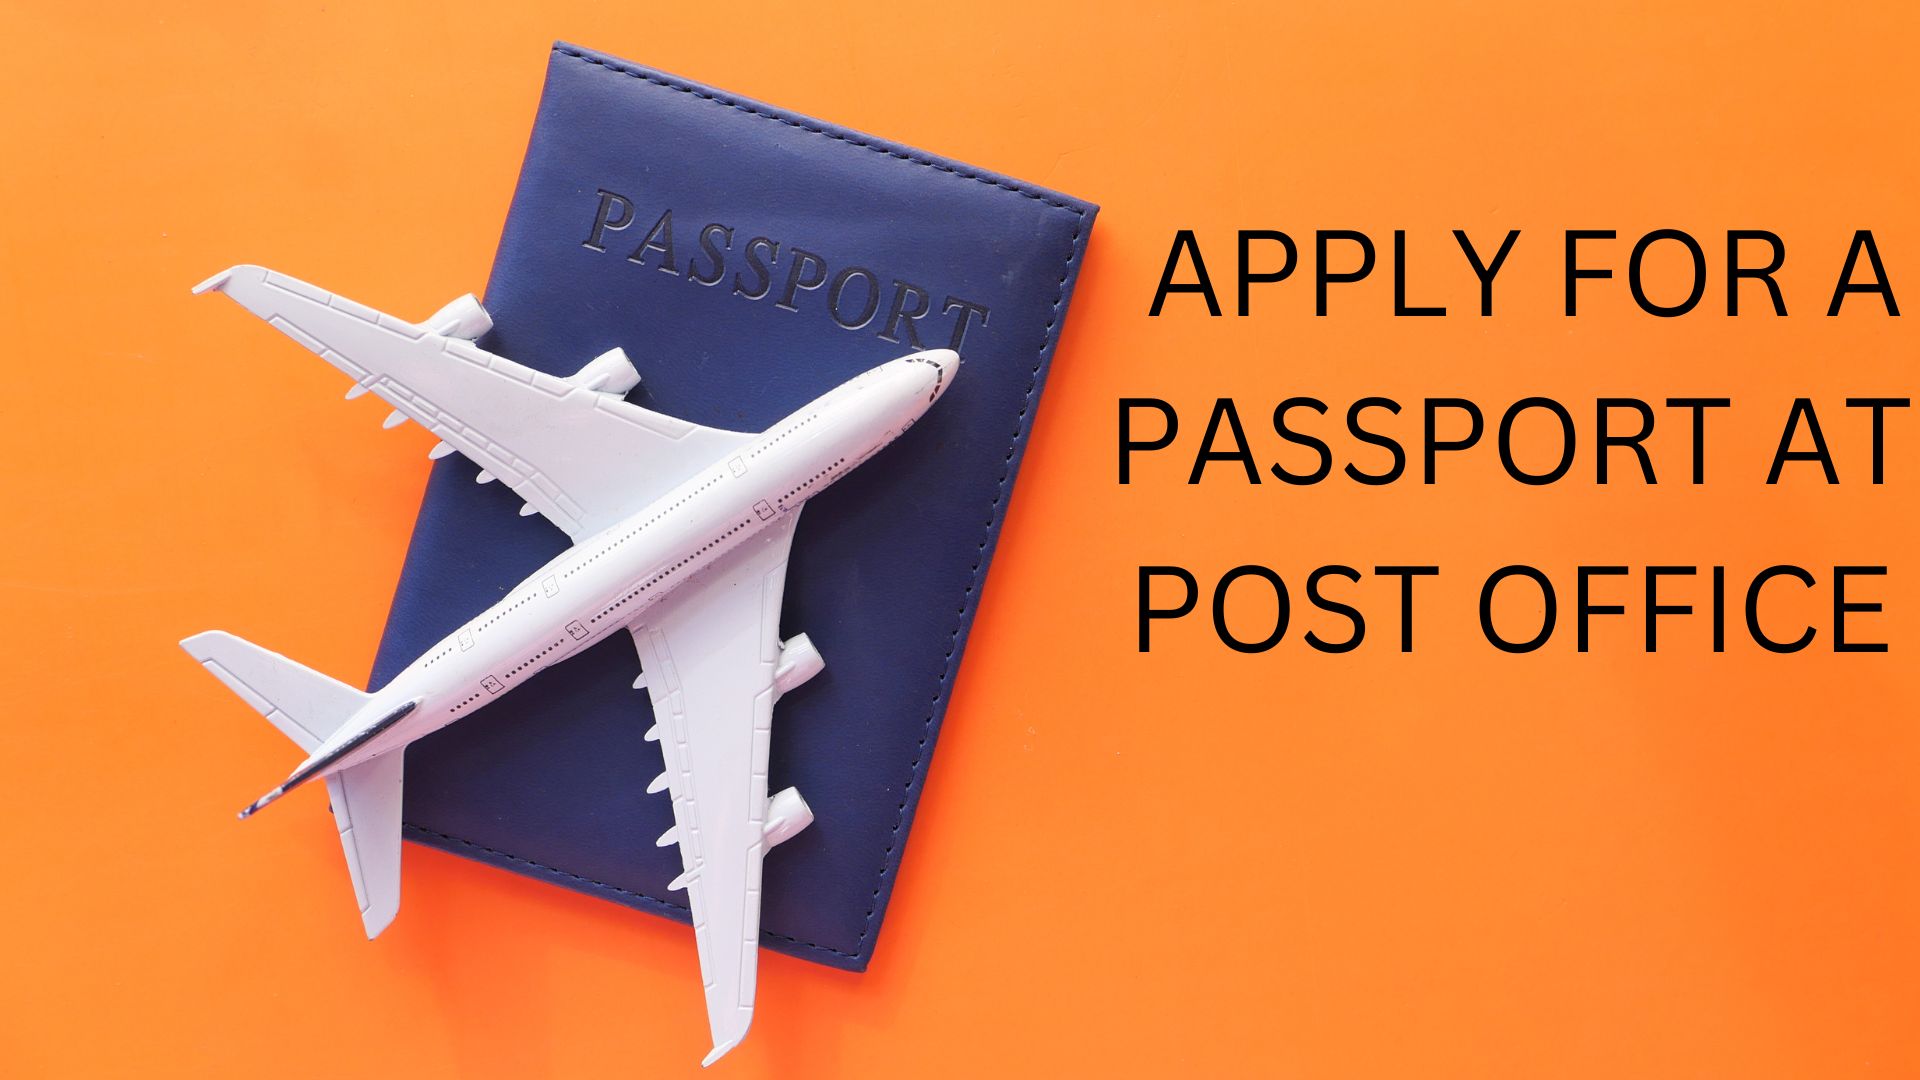 APPLY FOR A PASSPORT AT  POST OFFICE